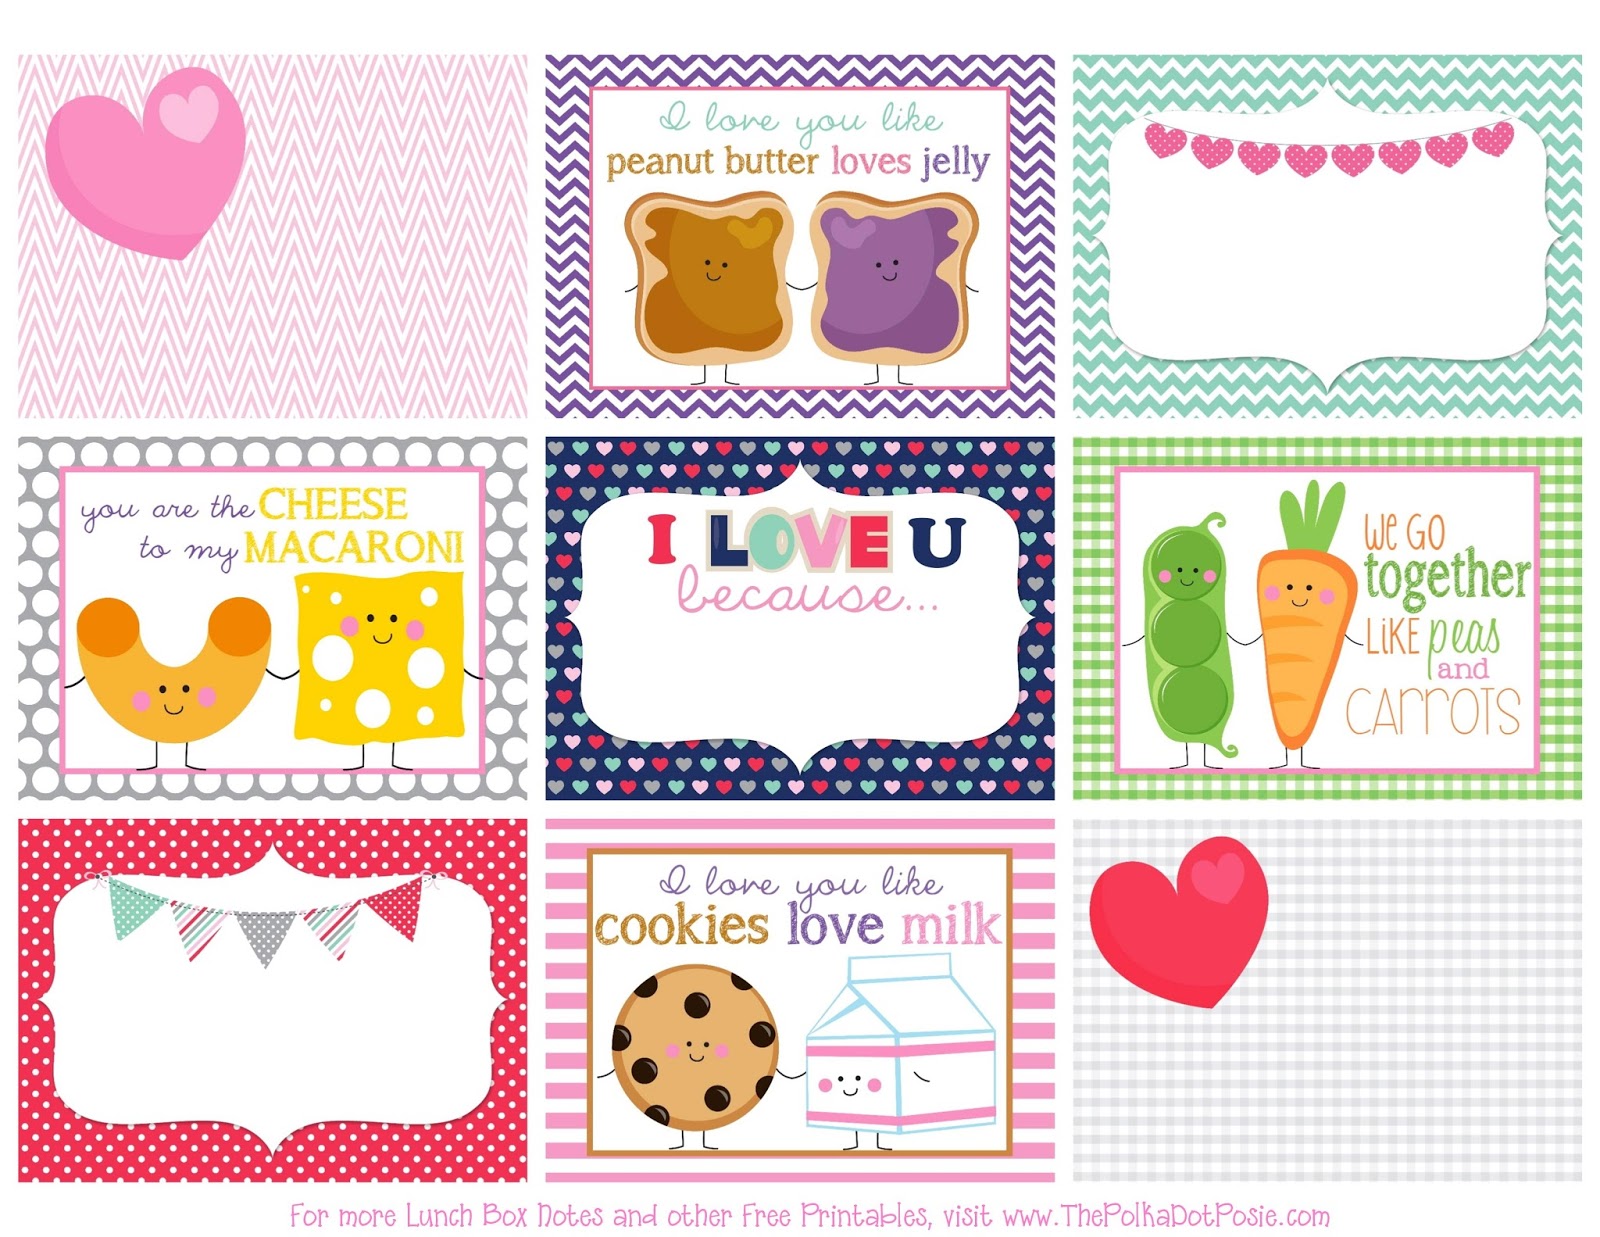 The Polka Dot Posie: Printable Valentine's Day Lunch Box Notes